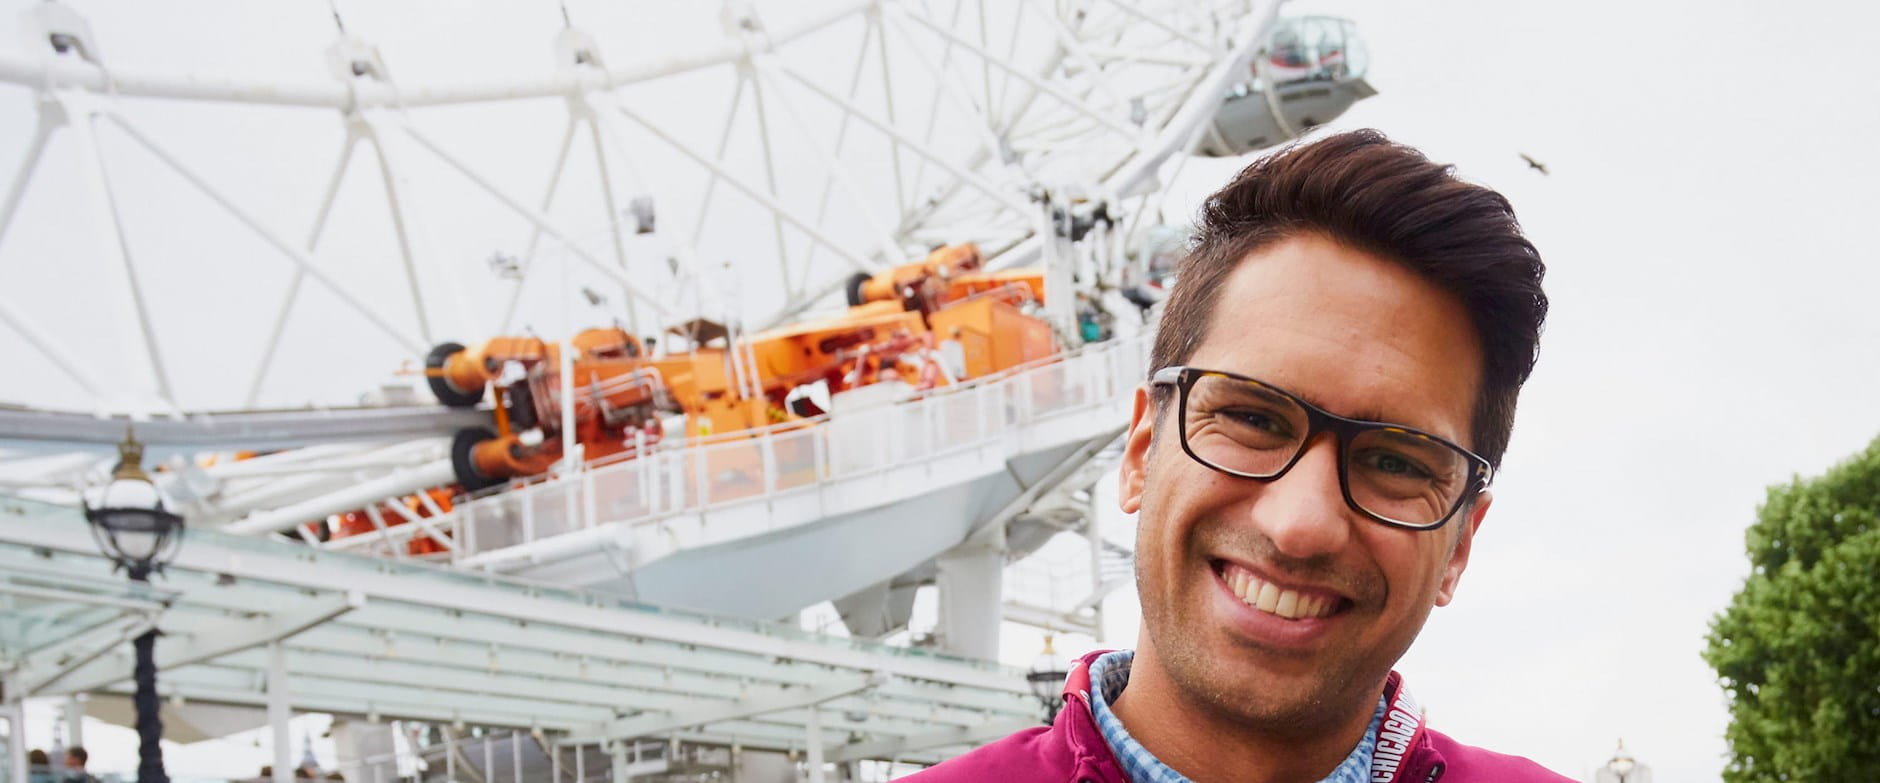 A Chicago Booth student smiles in front of the London Eye Ferris wheel